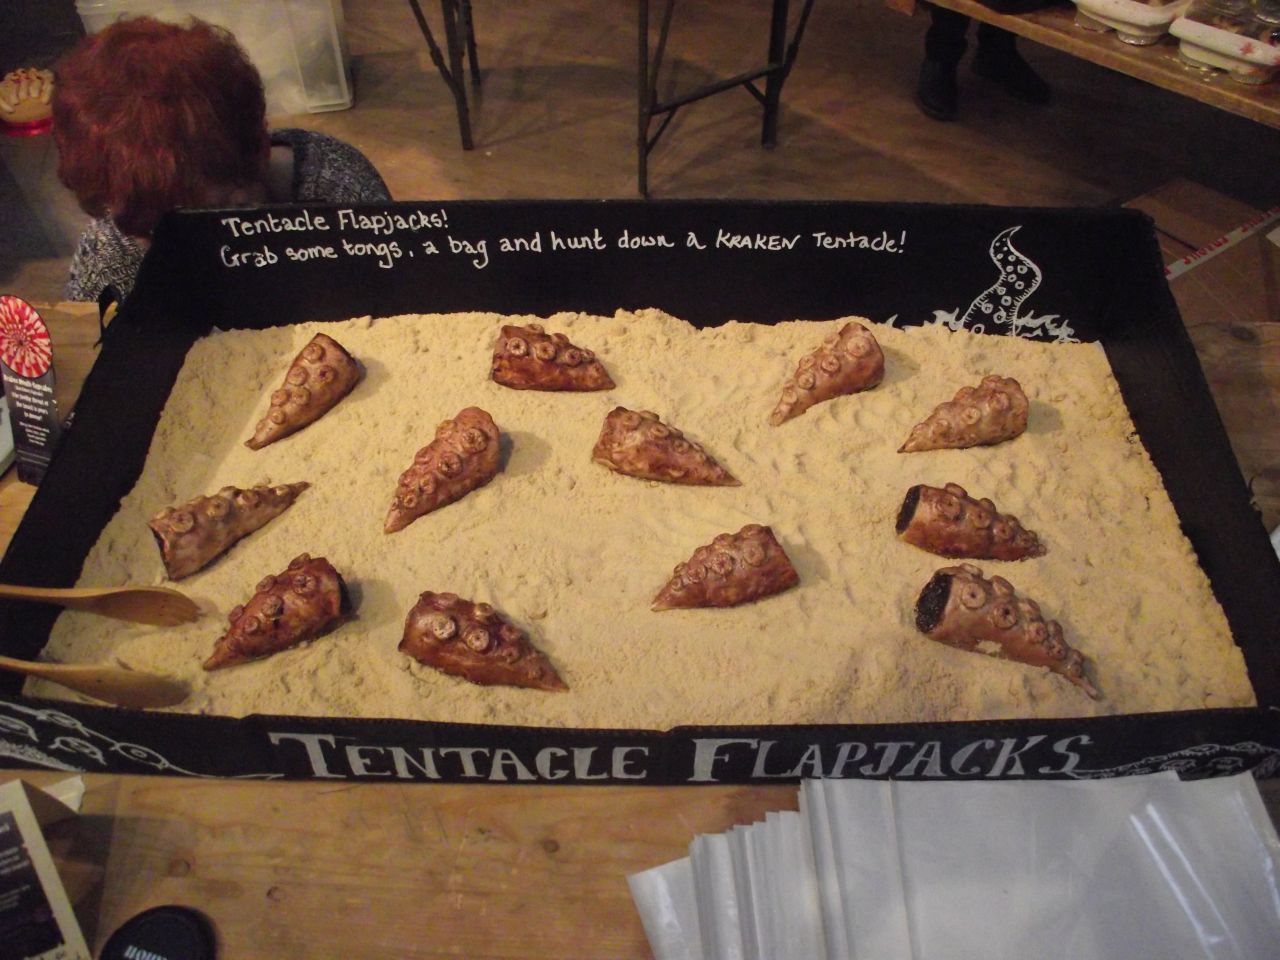 Tentacle flapjacks, covered with the finest white chocolate, made by <a href="https://www.facebook.com/HeartacheCakes" target="_blank" target="_blank">Heartache Cakes</a>.